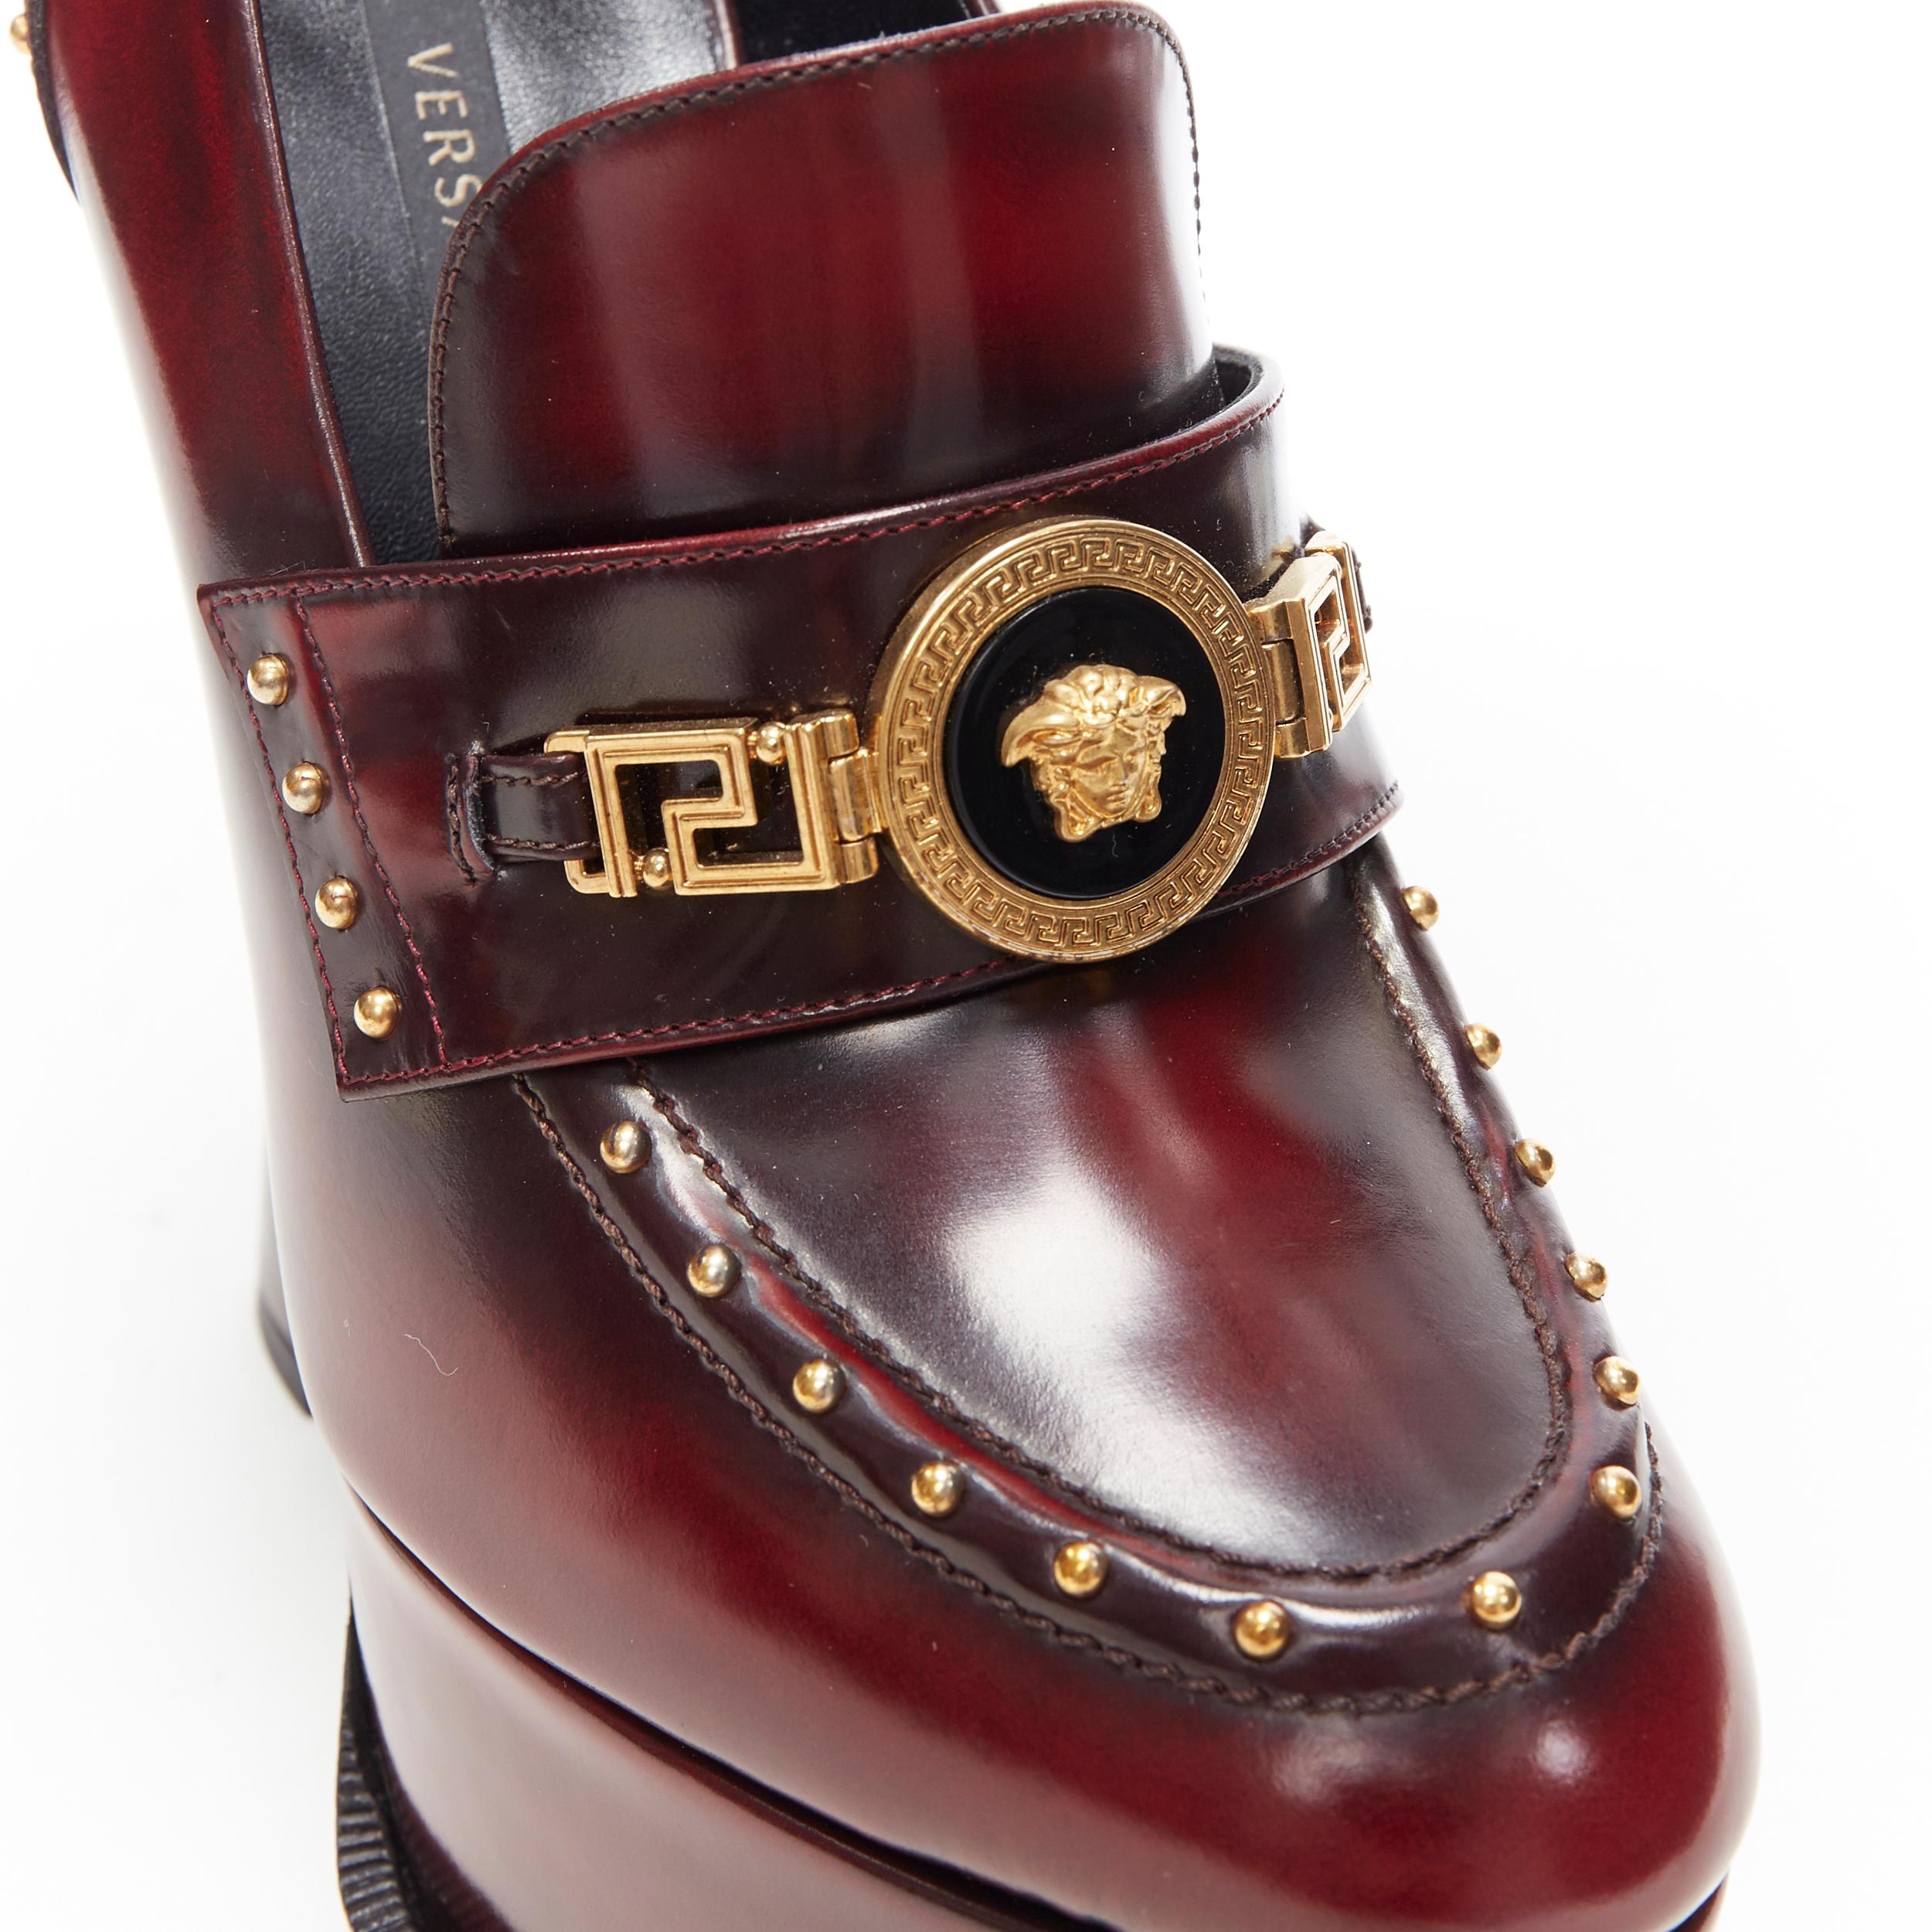 new VERSACE AW18 Runway burgundy studded Medusa chain loafer platform heel EU37
Brand: Versace
Designer: Donatella Versace
Collection: Fall Winter 2018
Model Name / Style: Loafer platforms
Material: Leather
Color: Burgundy
Pattern: Solid
Extra